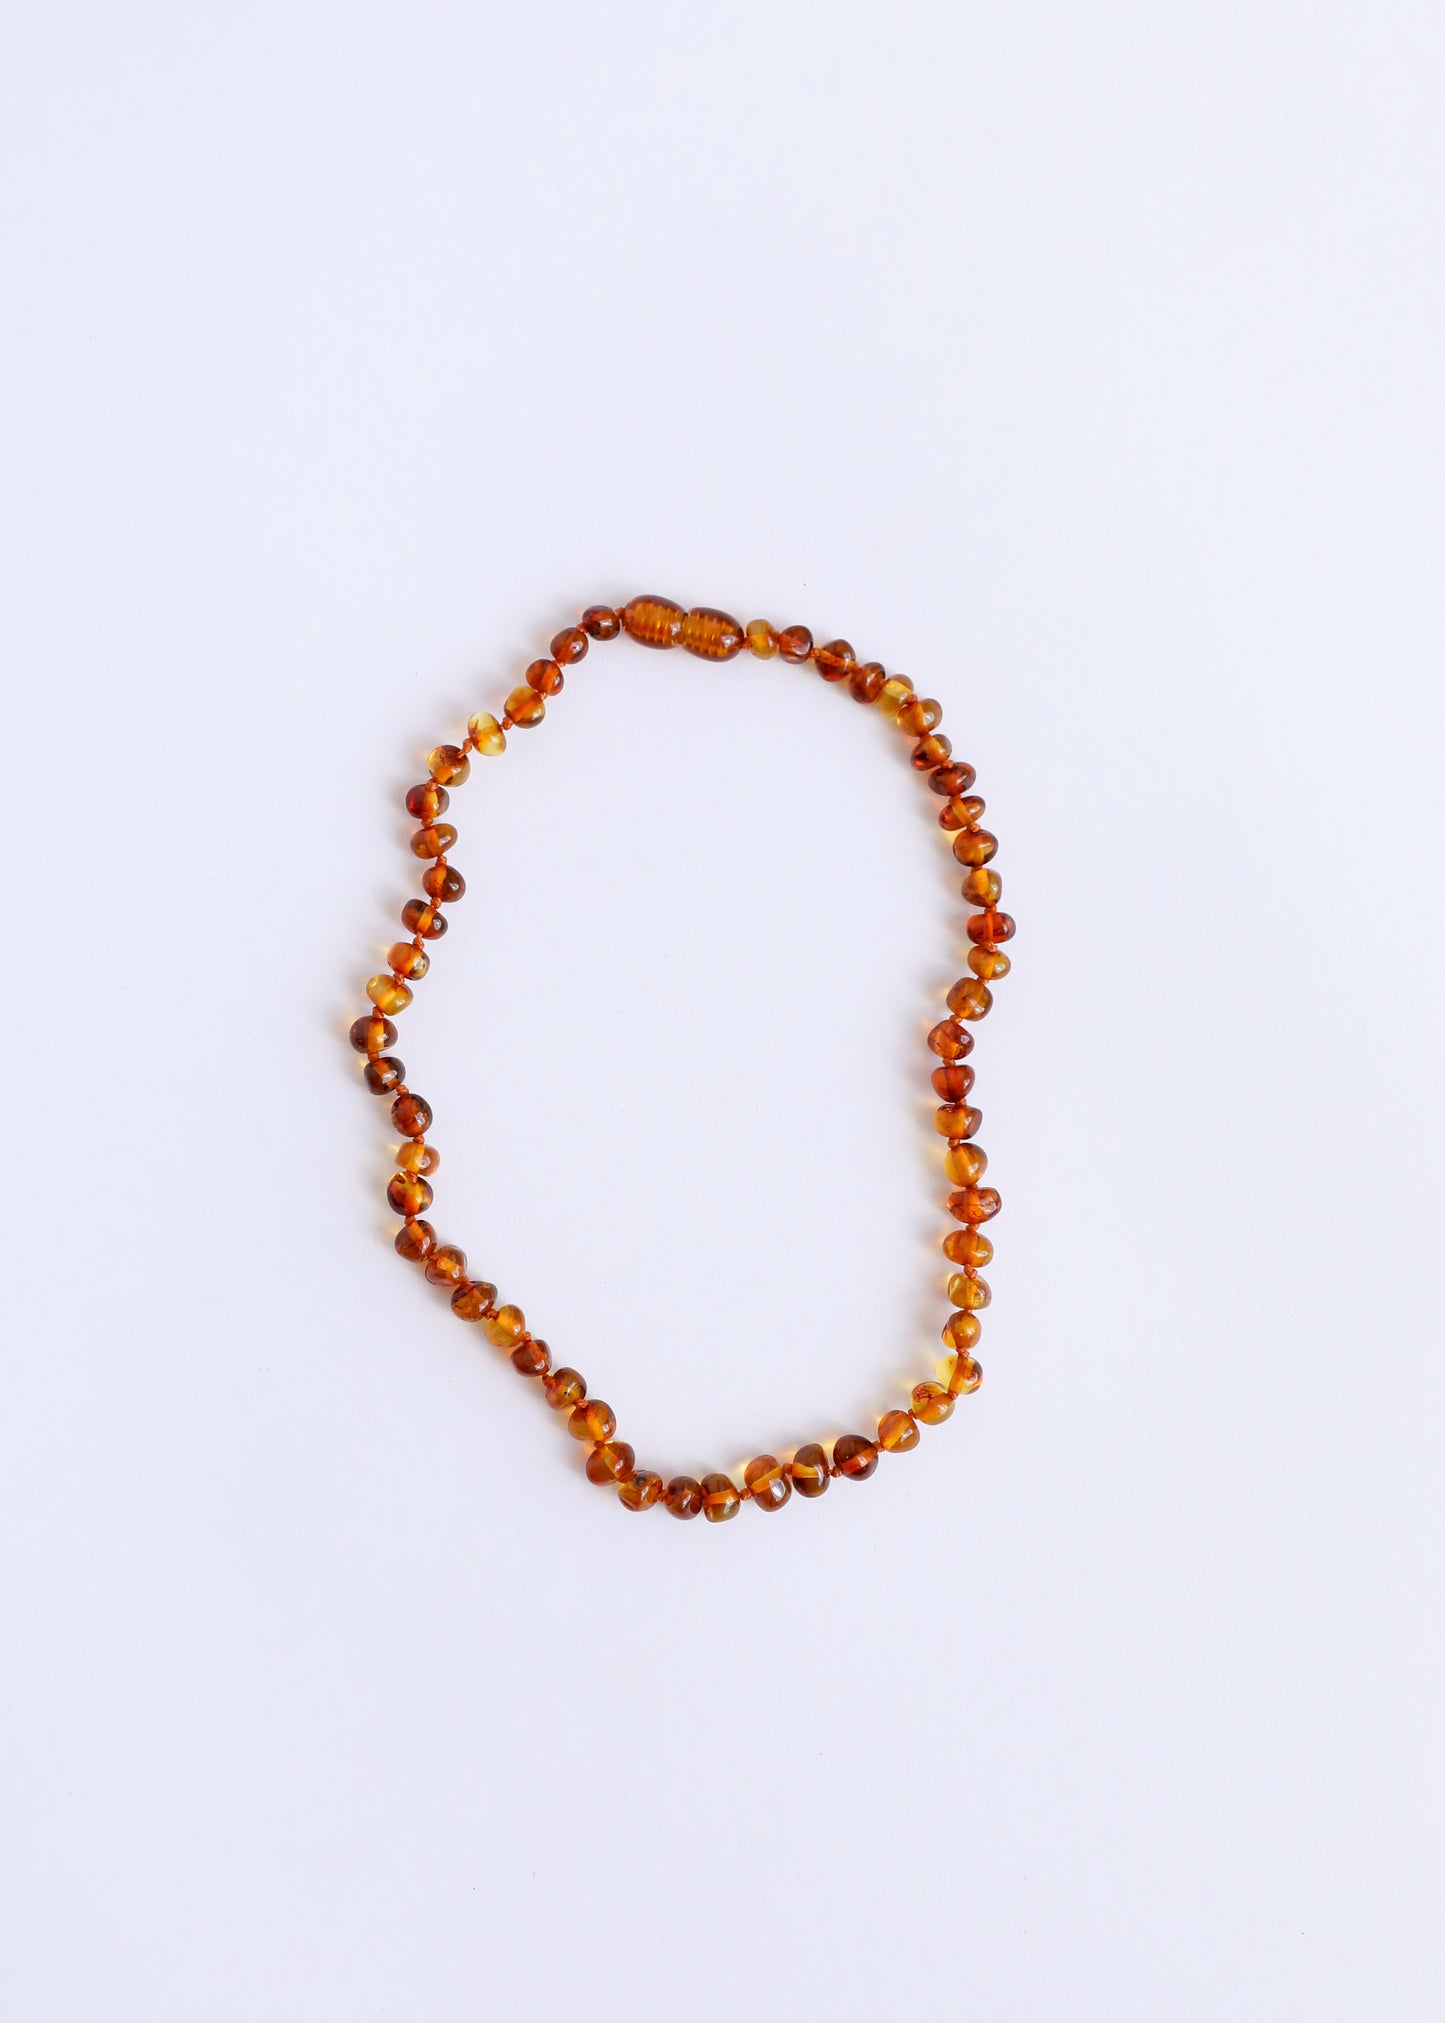 Polished Cognac Baltic Amber || Necklace of